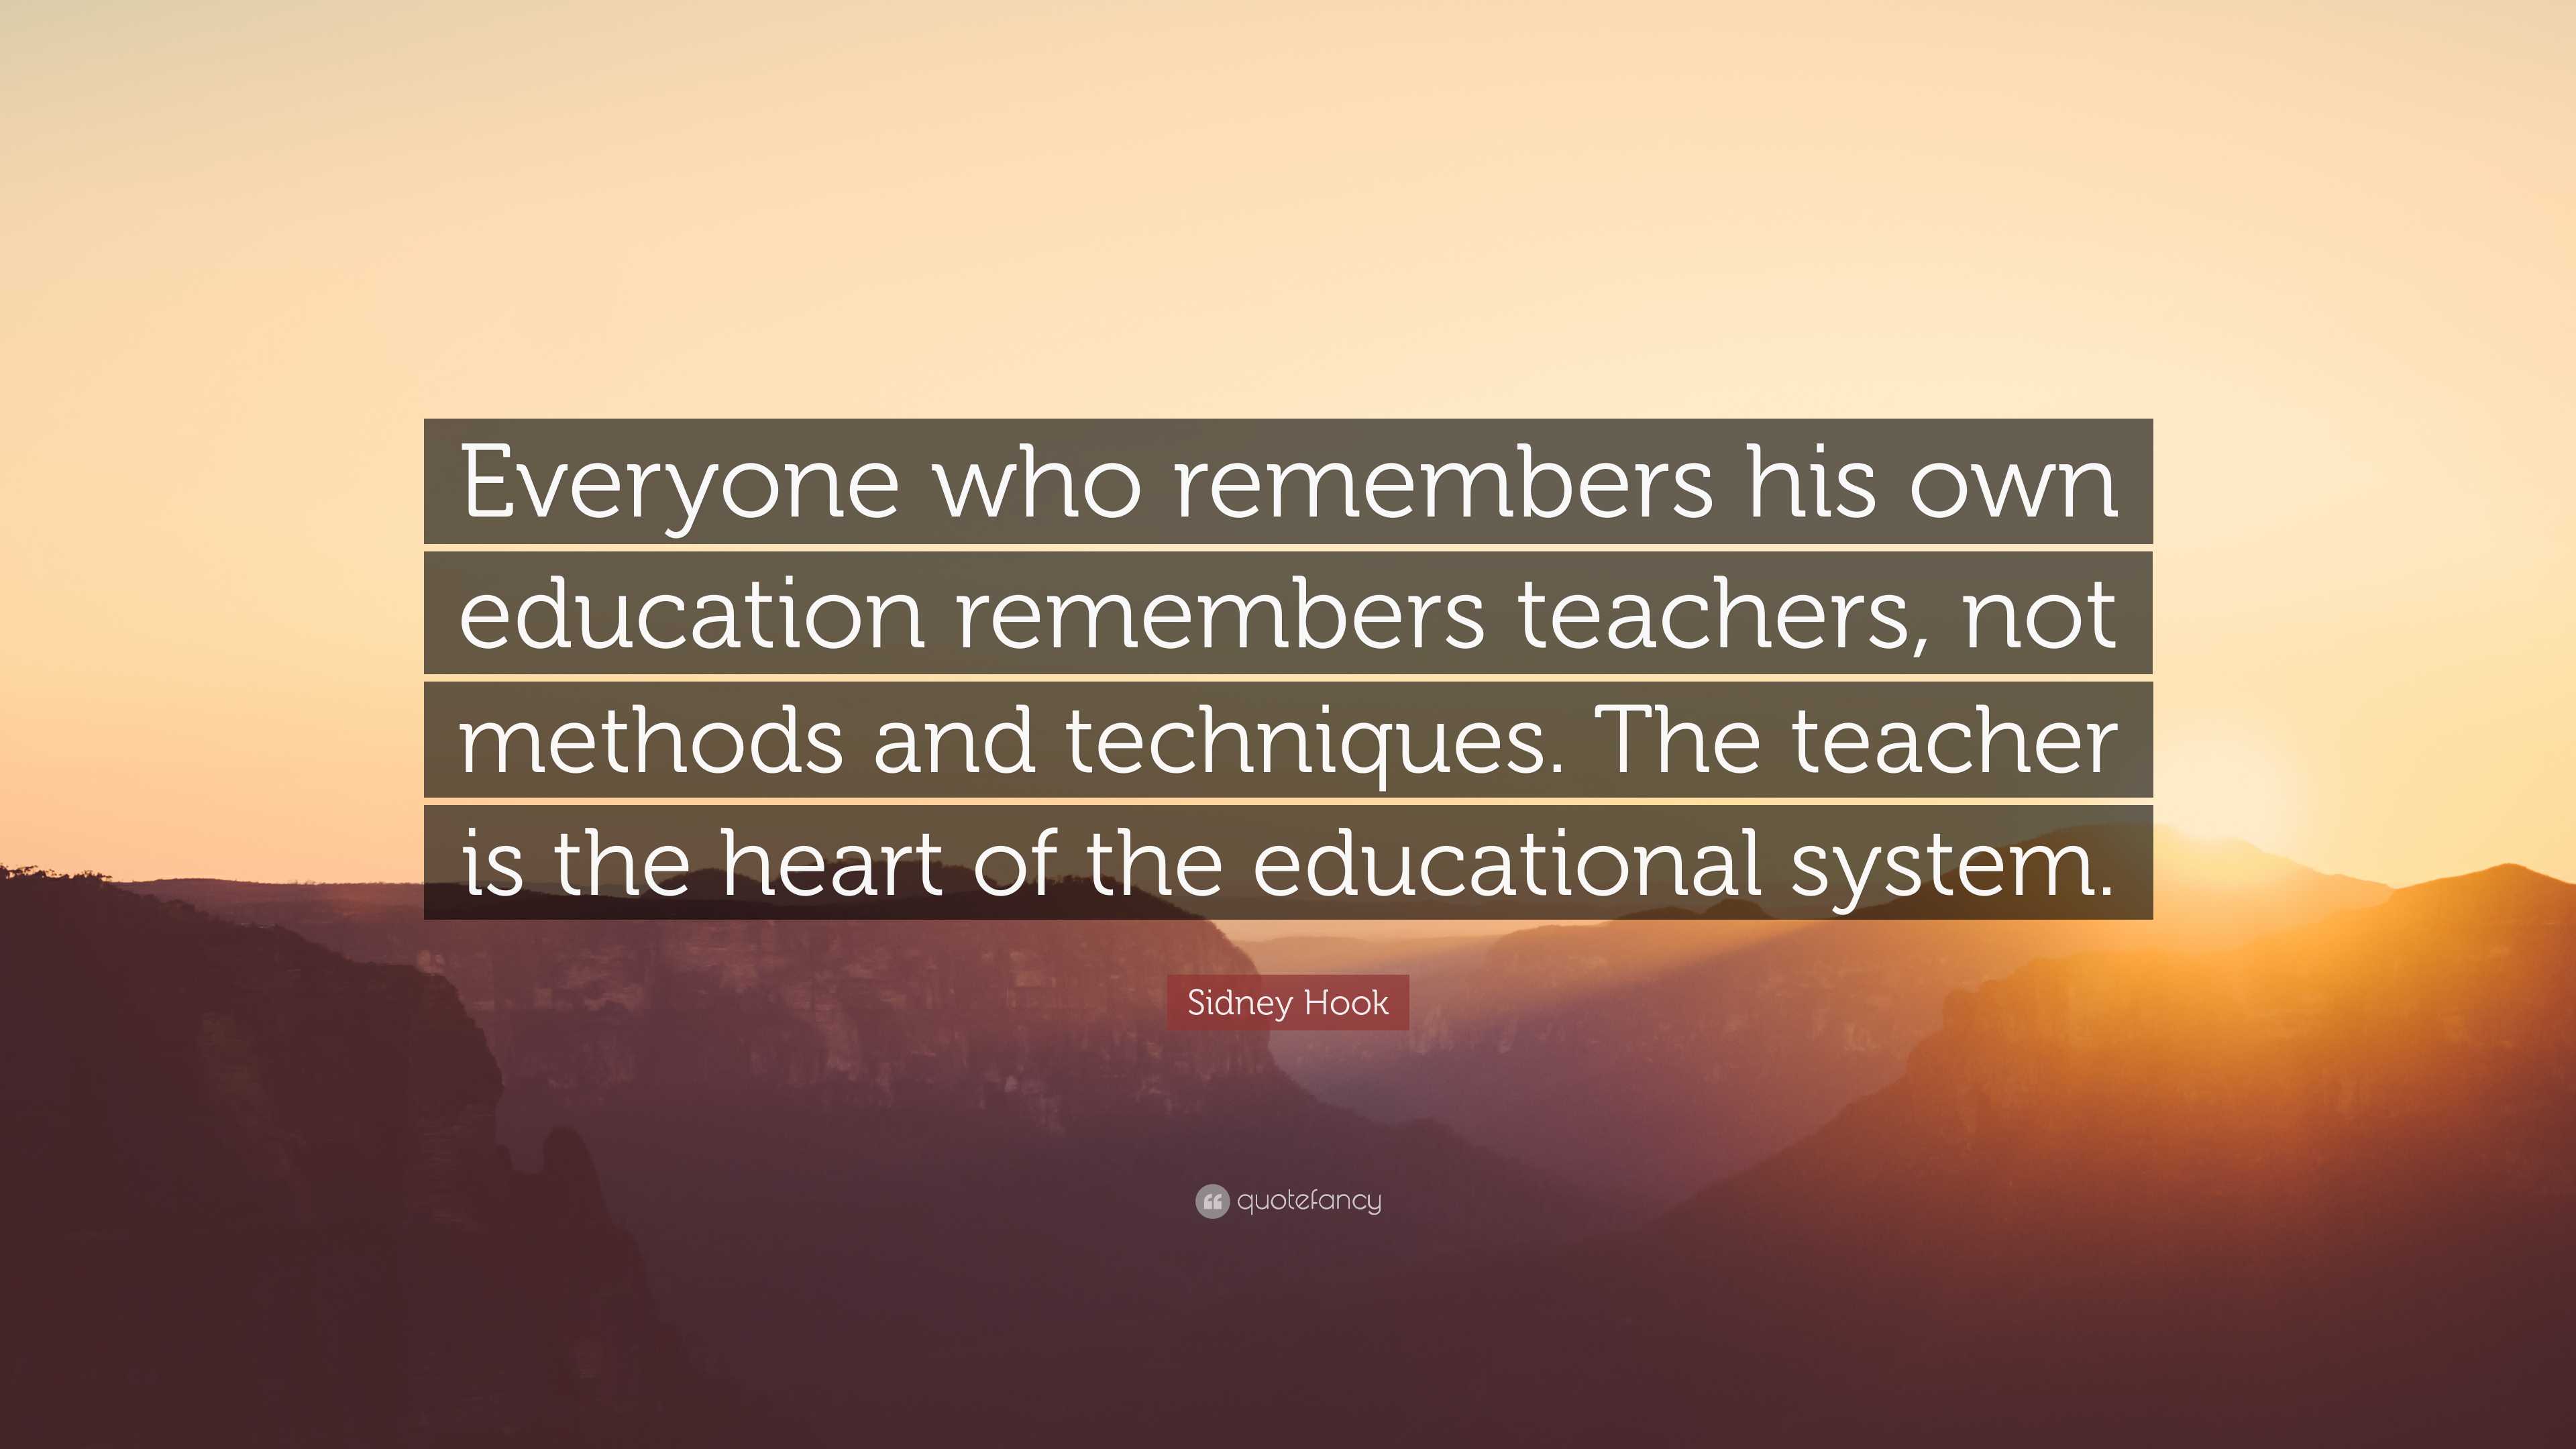 Sidney Hook Quote: “Everyone who remembers his own education remembers ...